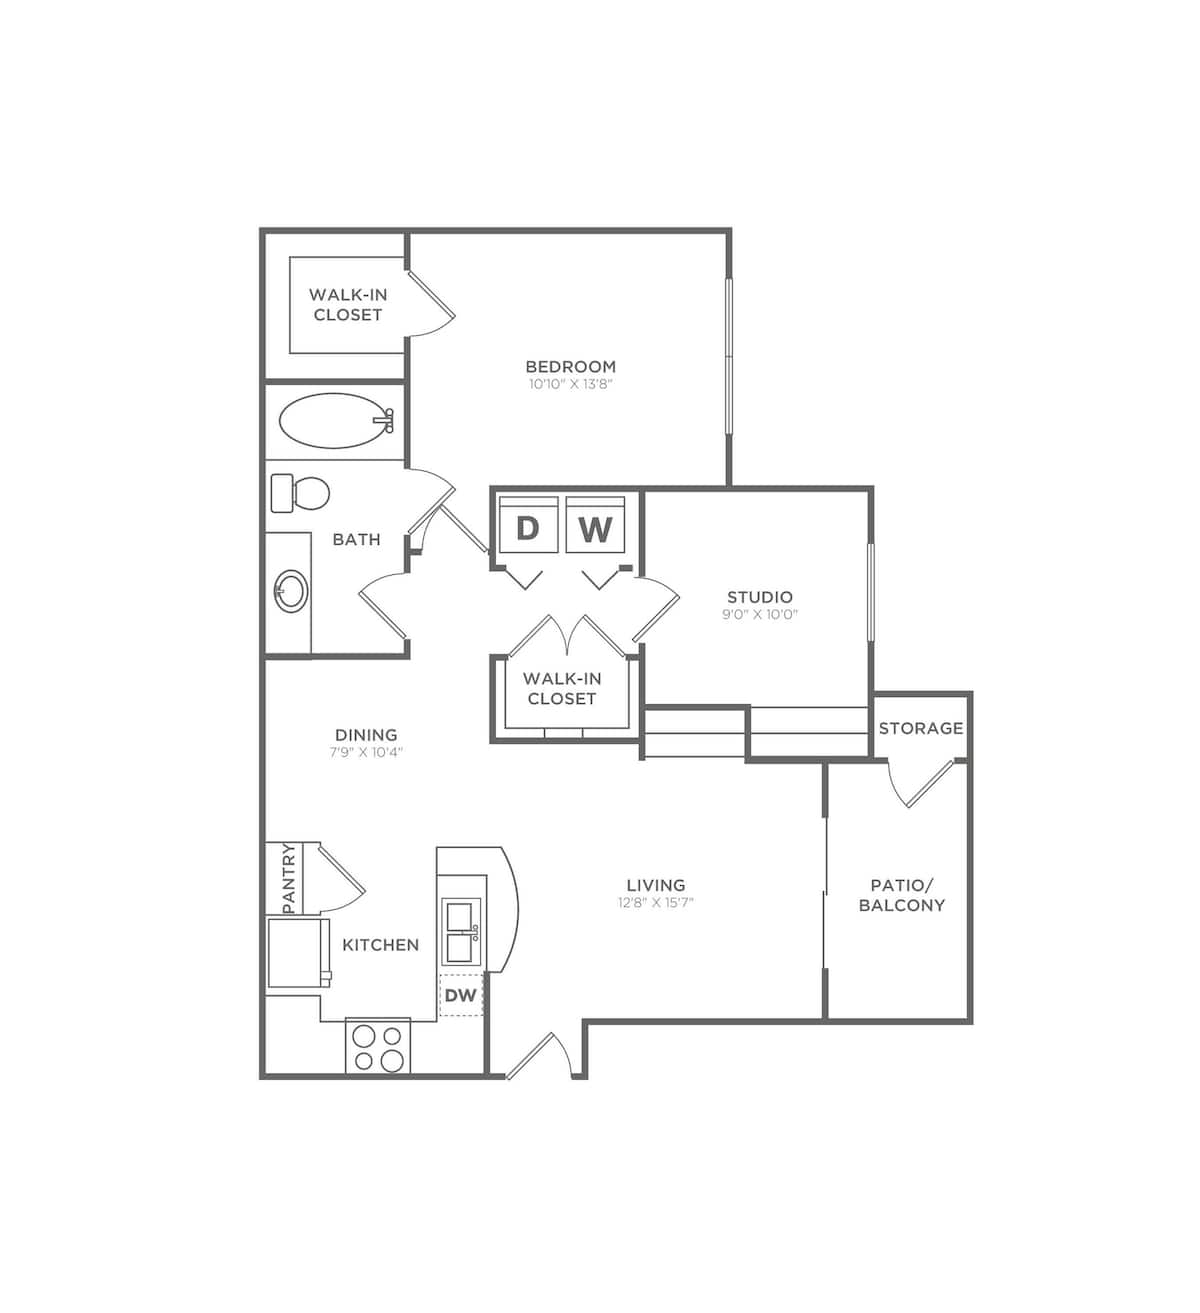 Floorplan diagram for A2-Classic, showing 1 bedroom